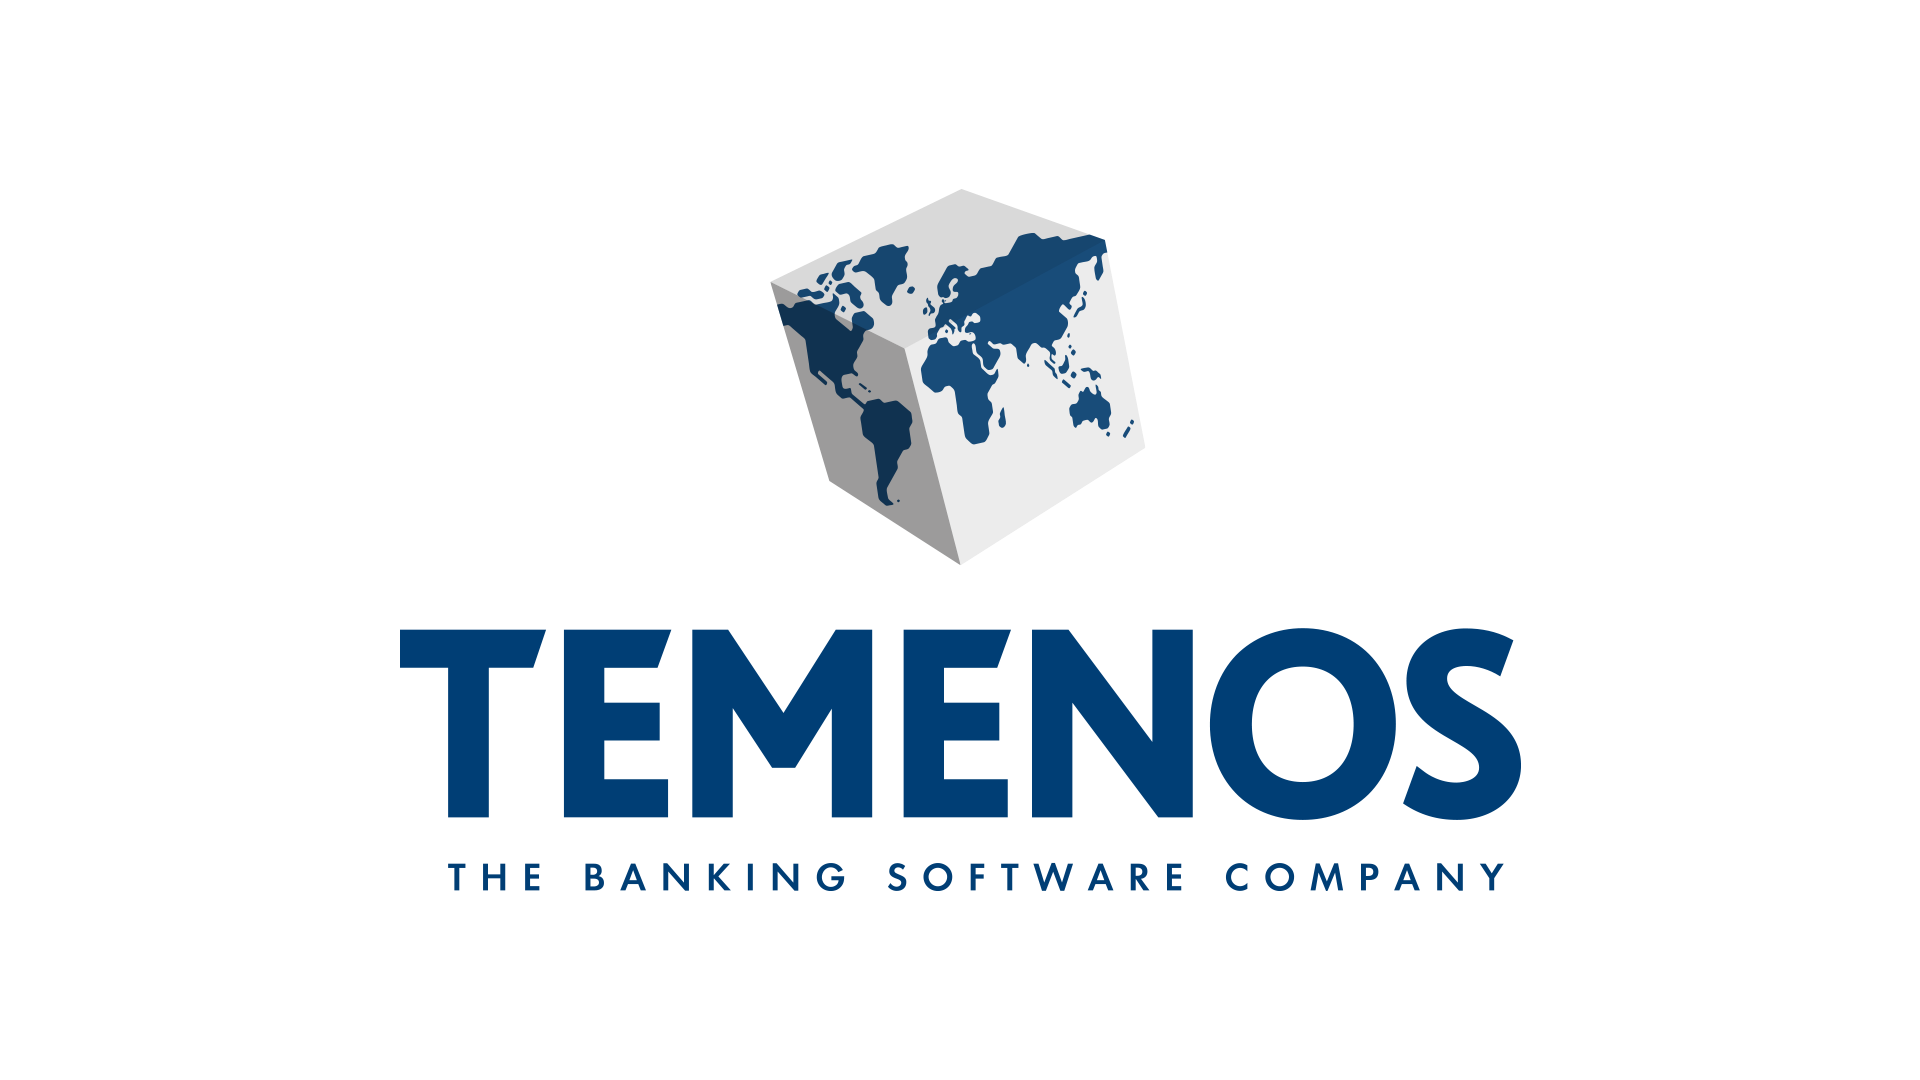 Temenos Transforms Banking with The Temenos Banking Cloud to Accelerate SaaS and AI adoption with Instant Access to Sandbox, Banking Services, and Marketplace